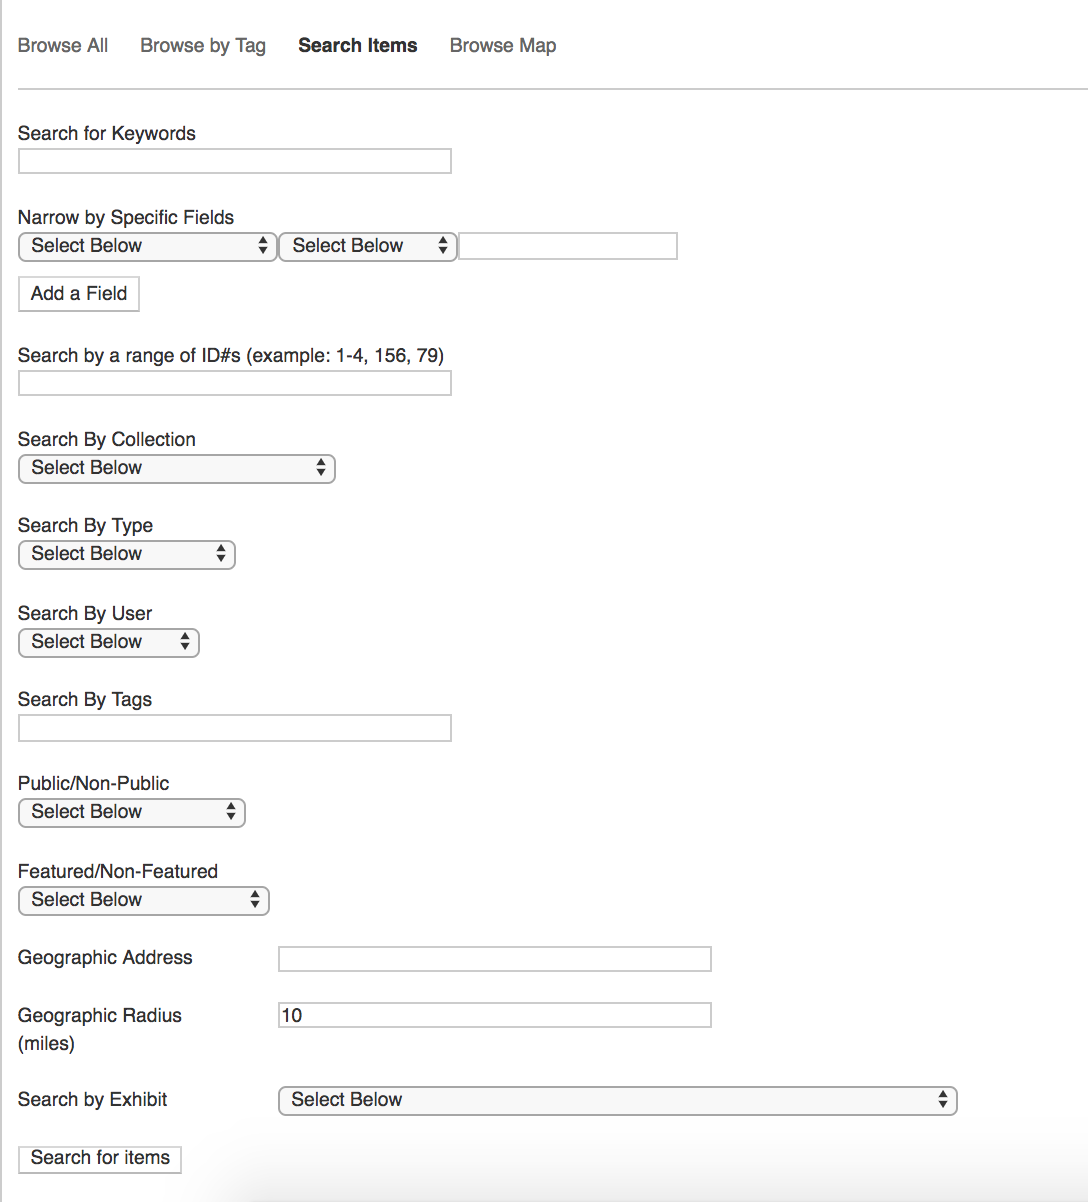 Public view of the advanced search options, as described in the list below. Text is all black, on a white background.